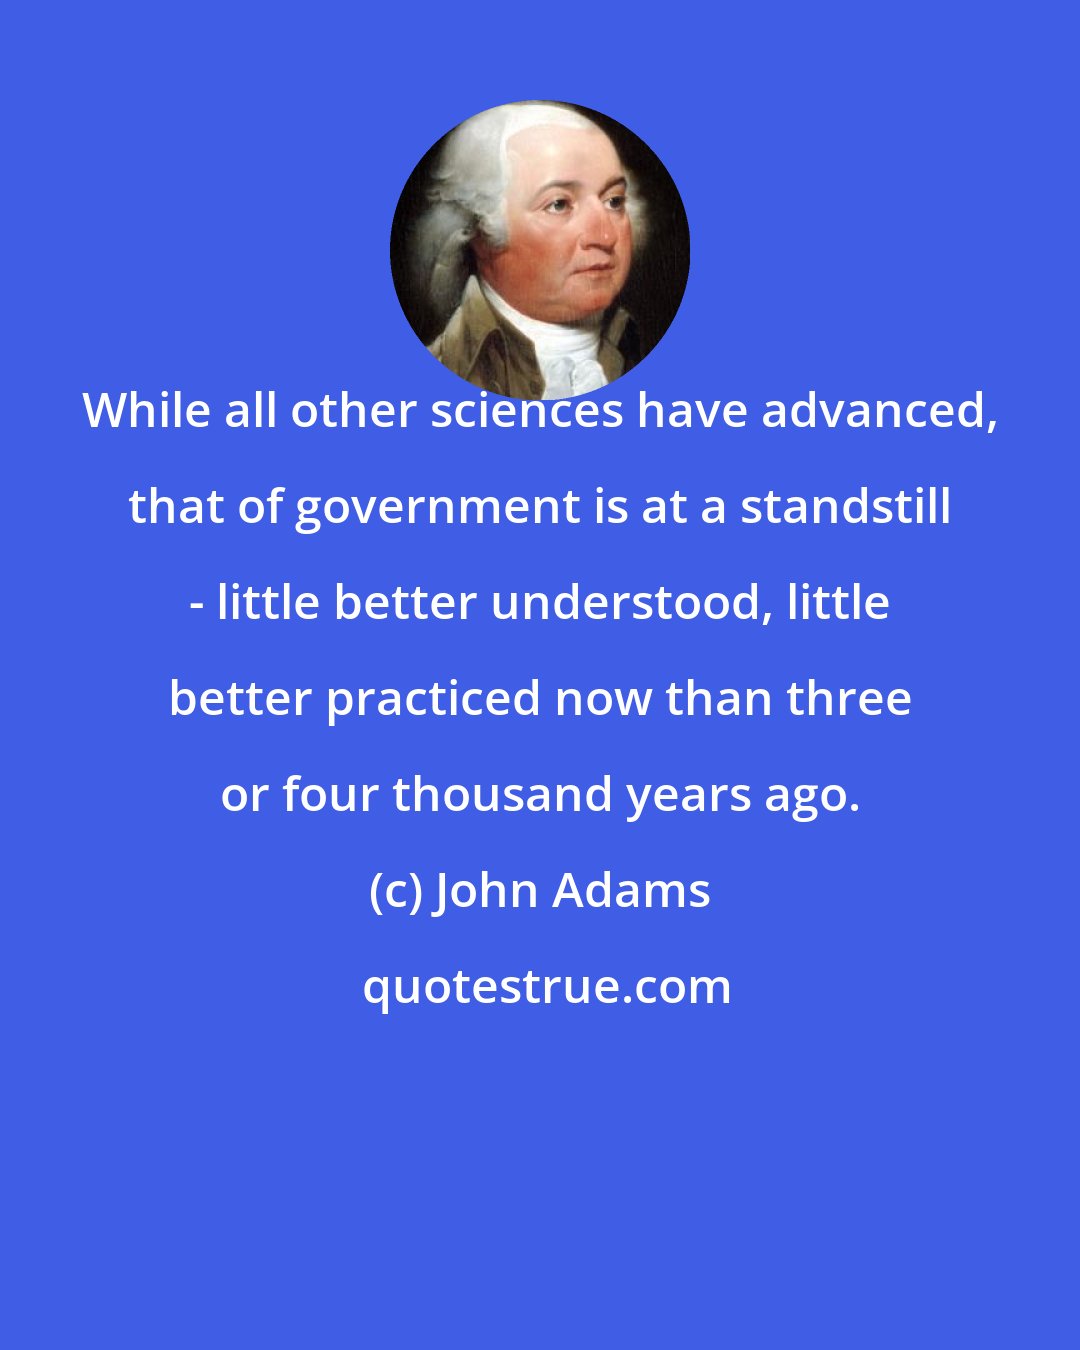 John Adams: While all other sciences have advanced, that of government is at a standstill - little better understood, little better practiced now than three or four thousand years ago.